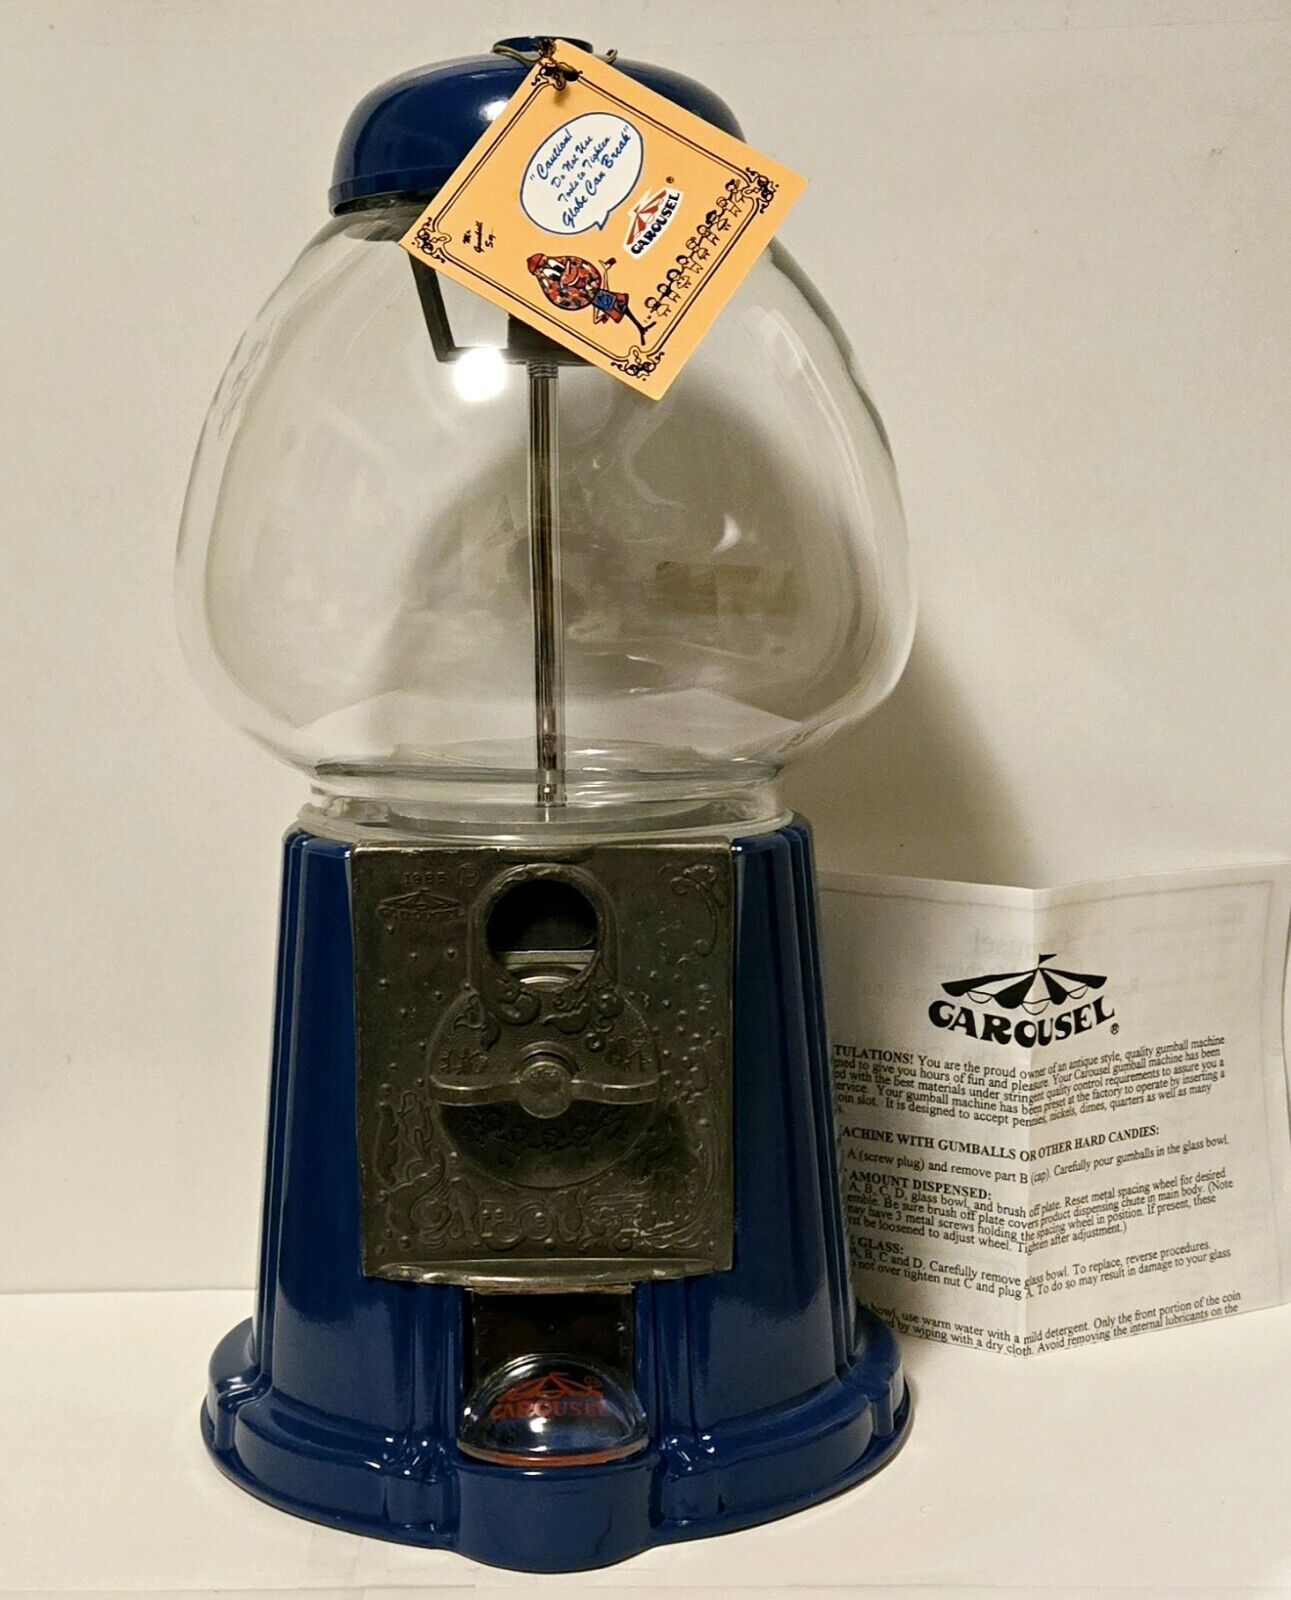 RARE Vintage 1985 Carousel Gumball Candy Vending Machine, Blue, 15” NEW